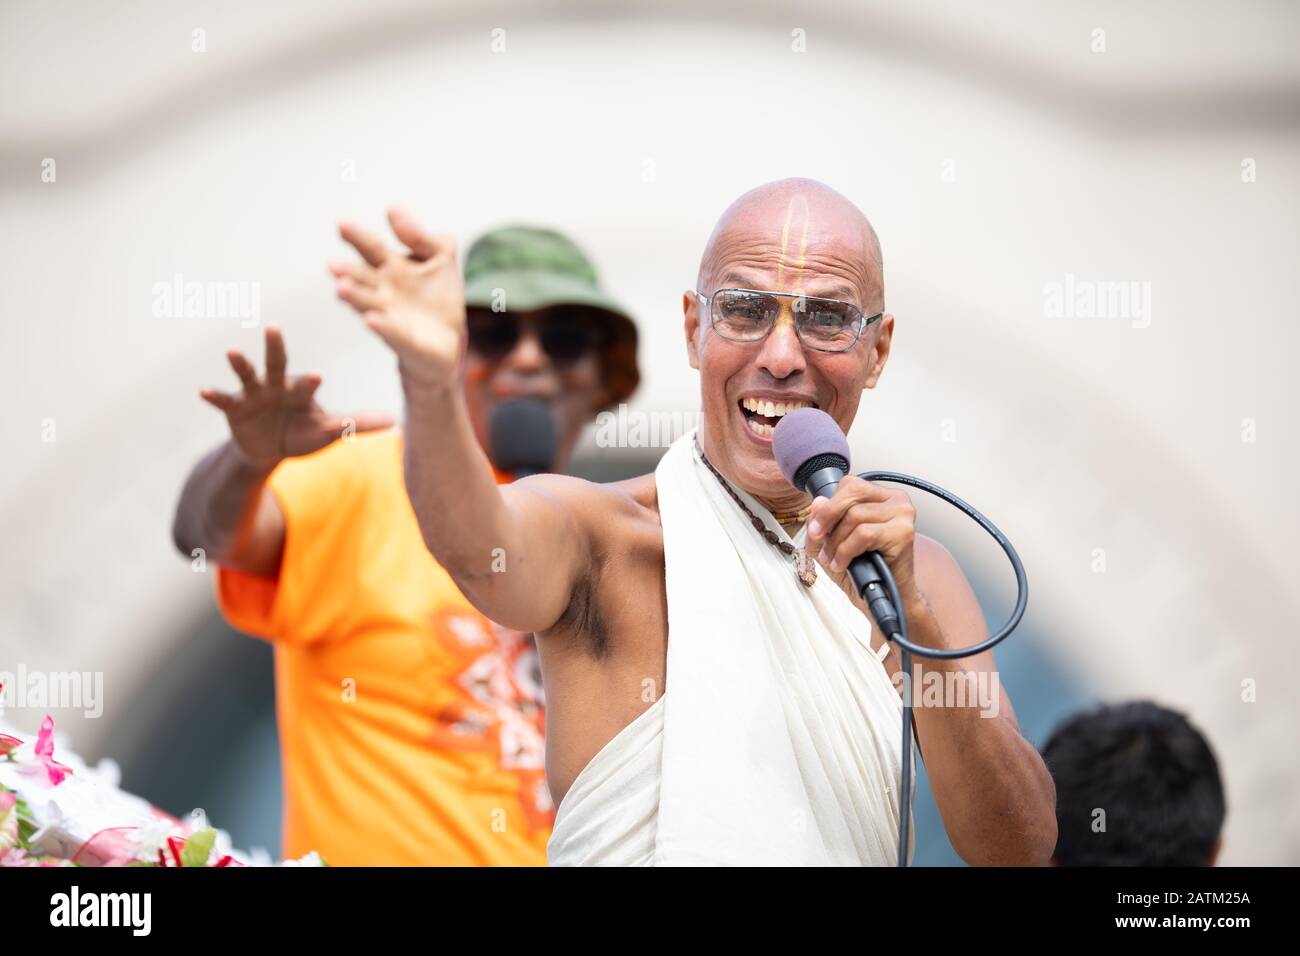 Chicago, Illinois, USA - August 8, 2019: The Bud Billiken Parade, Members of the Iskcon Chicago, going down MLK street at the parade Stock Photo